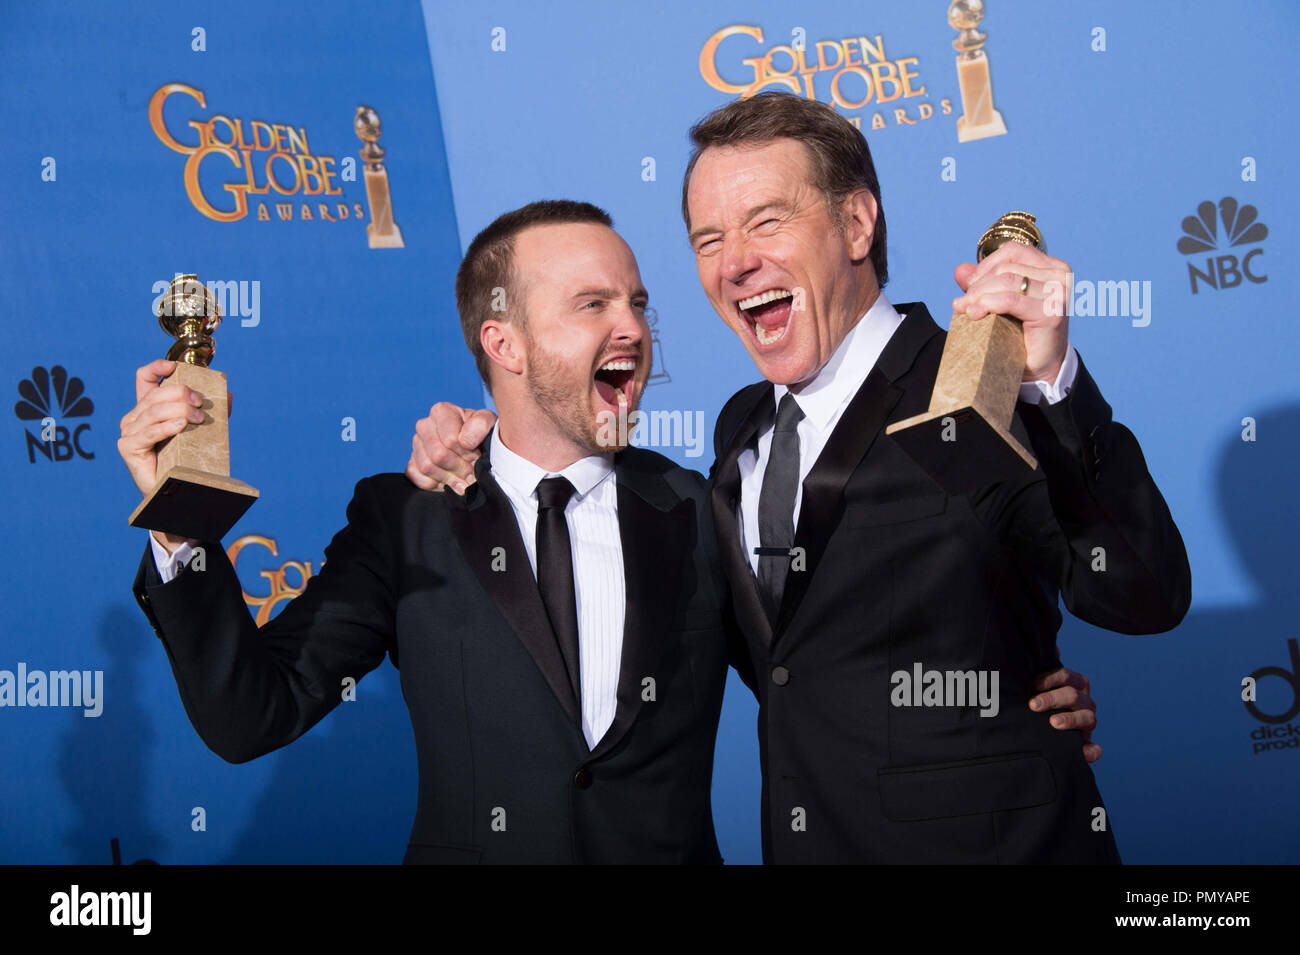 For BEST TELEVISION SERIES – DRAMA, the Golden Globe is awarded to “BREAKING BAD” (AMC), produced by Sony Pictures Television. Aaron Paul and Bryan Cranston pose with the award backstage in the press room at the 71st Annual Golden Globe Awards at the Beverly Hilton in Beverly Hills, CA on Sunday, January 12, 2014.  File Reference # 32222 381JRC  For Editorial Use Only -  All Rights Reserved Stock Photo